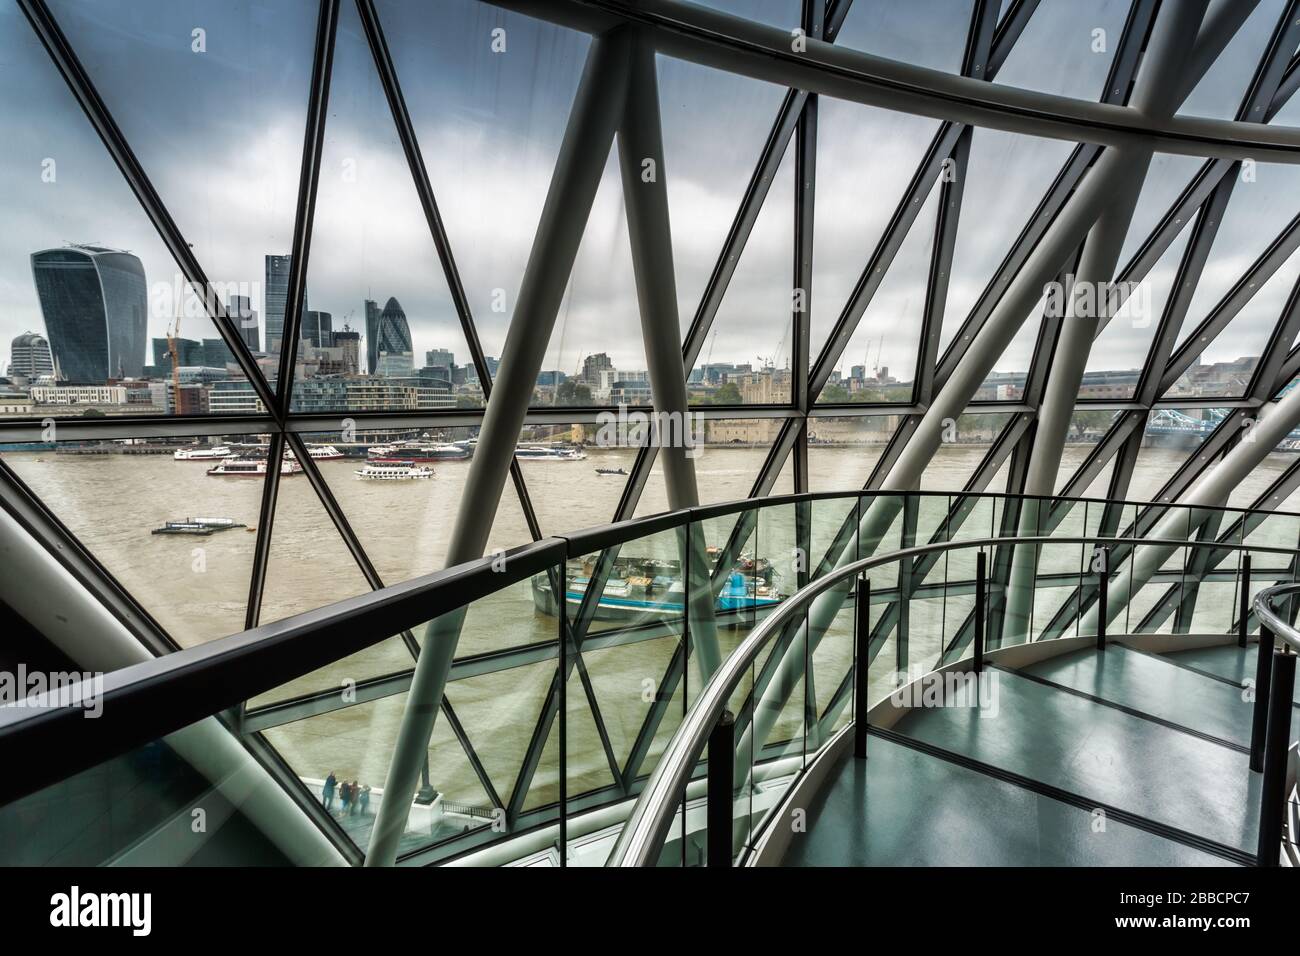 View of the River Thames from the interior staircase at City Hall, Southwark, which is the headquarters of the Greater London Authority, London Stock Photo